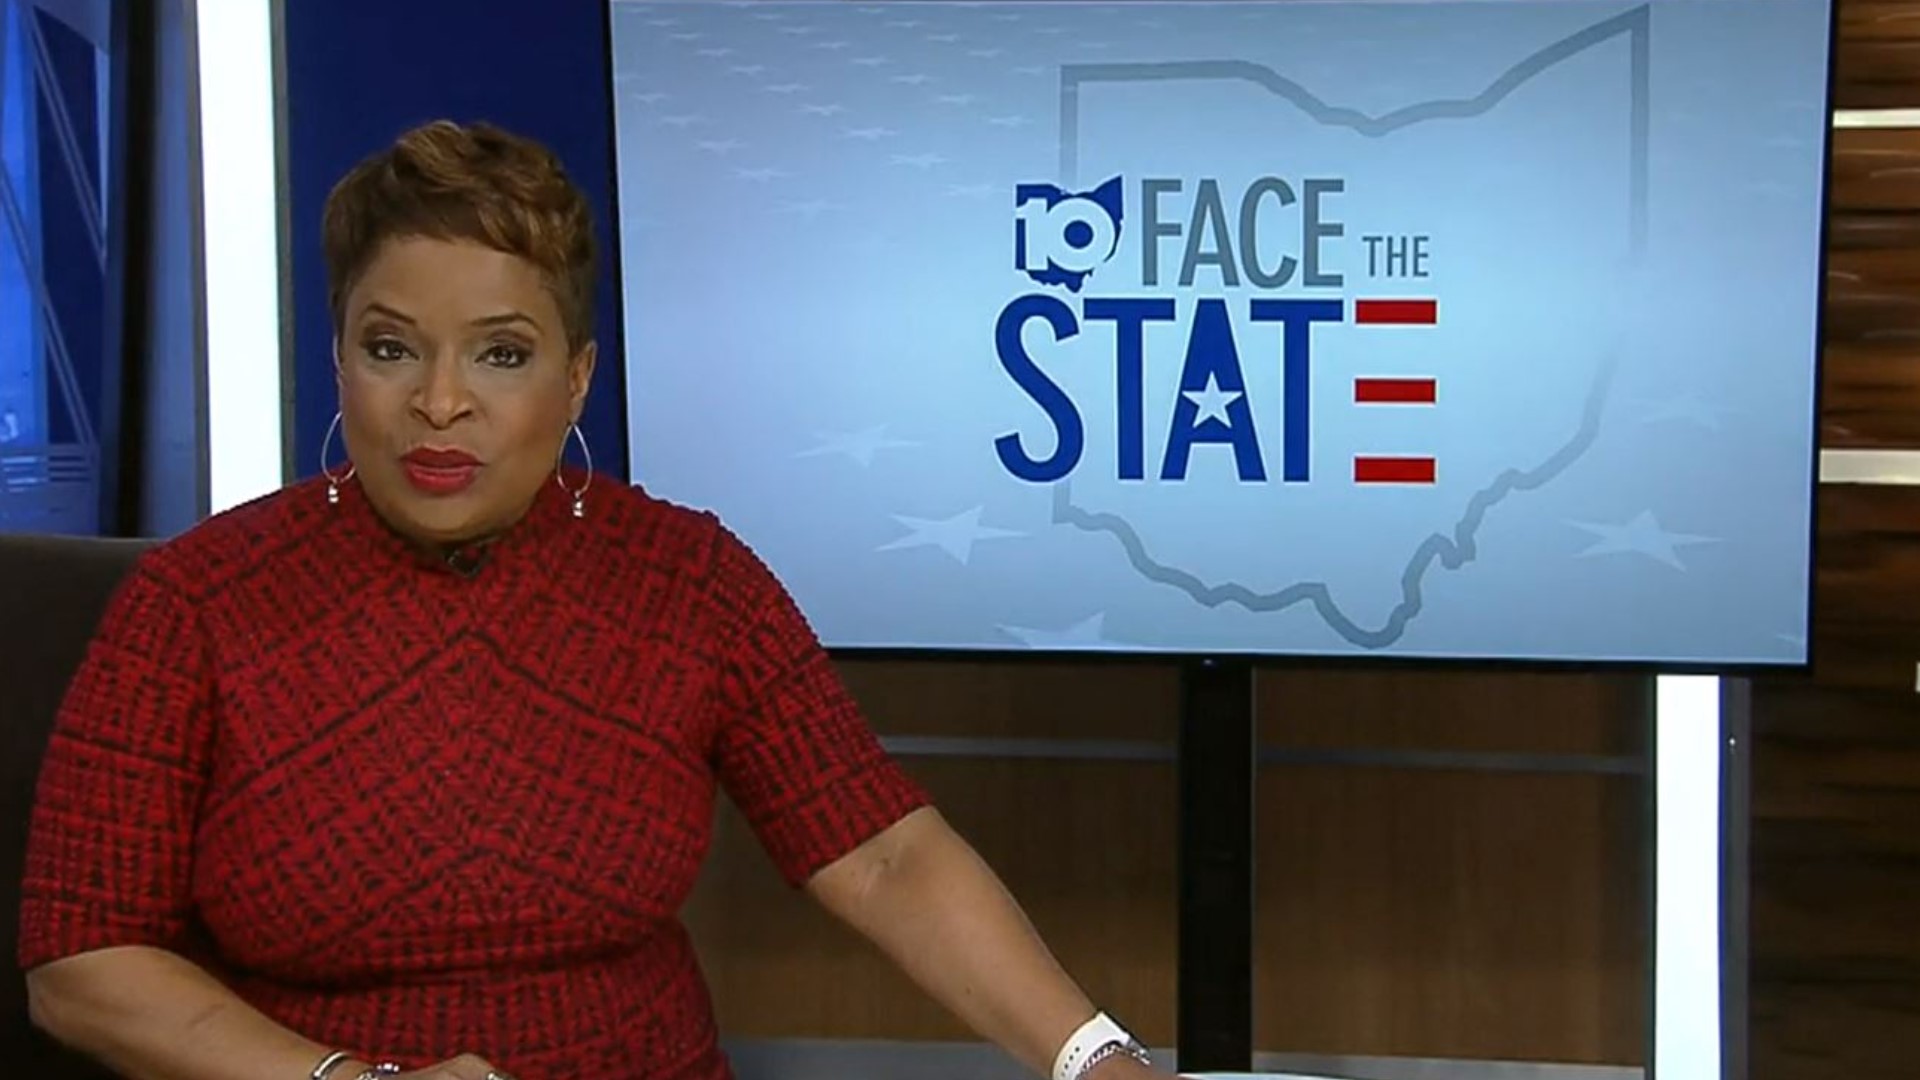 Face the State discusses the incoming COVID-19 vaccine that is scheduled to arrive in Ohio later this month.